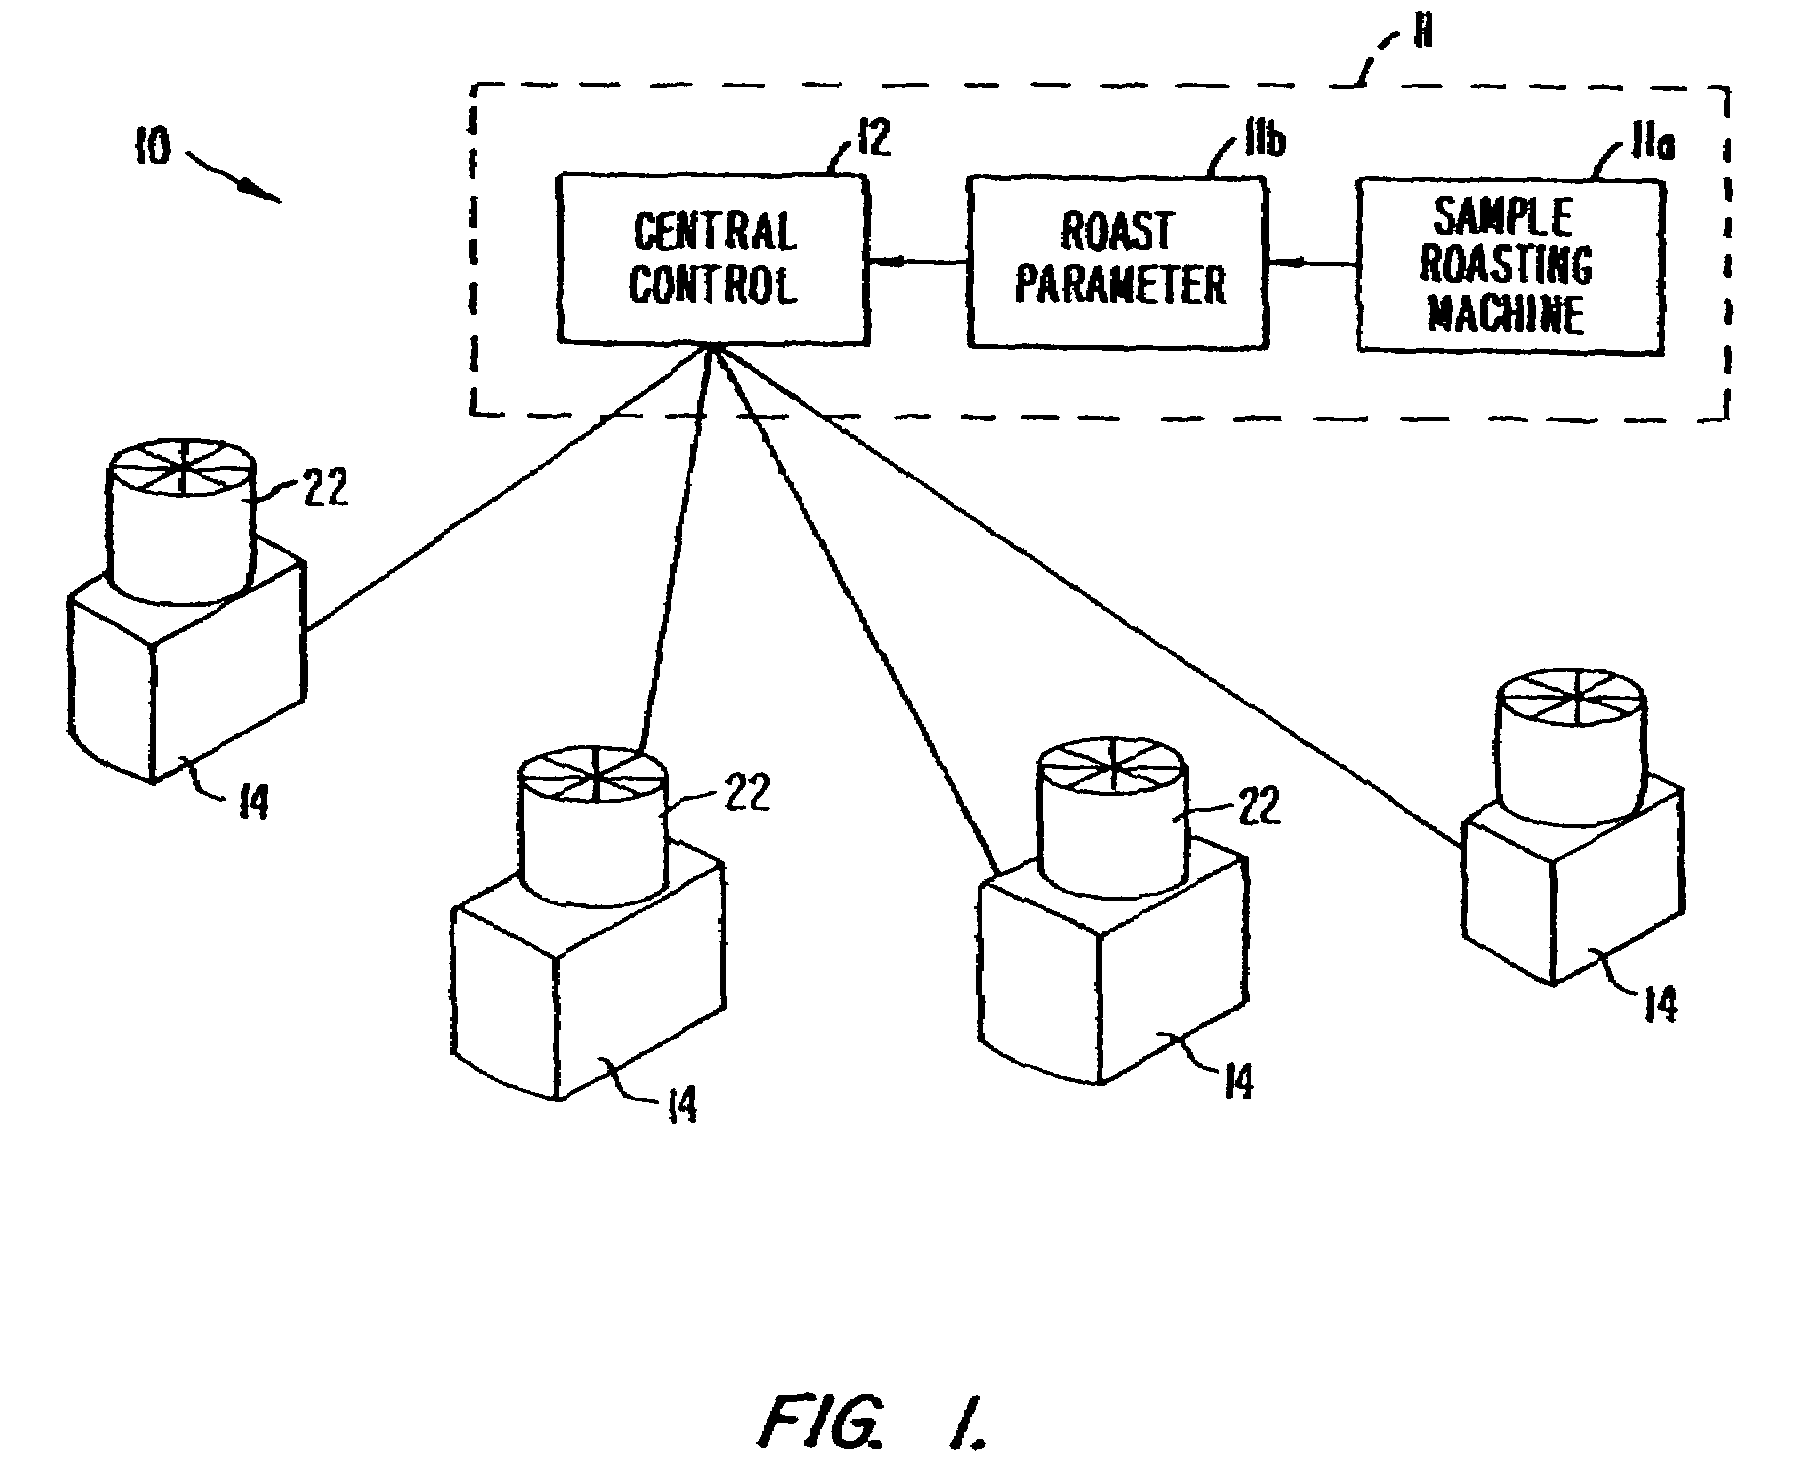 Method and apparatus for preventing the discharge of powdery caffeine during coffee roasting